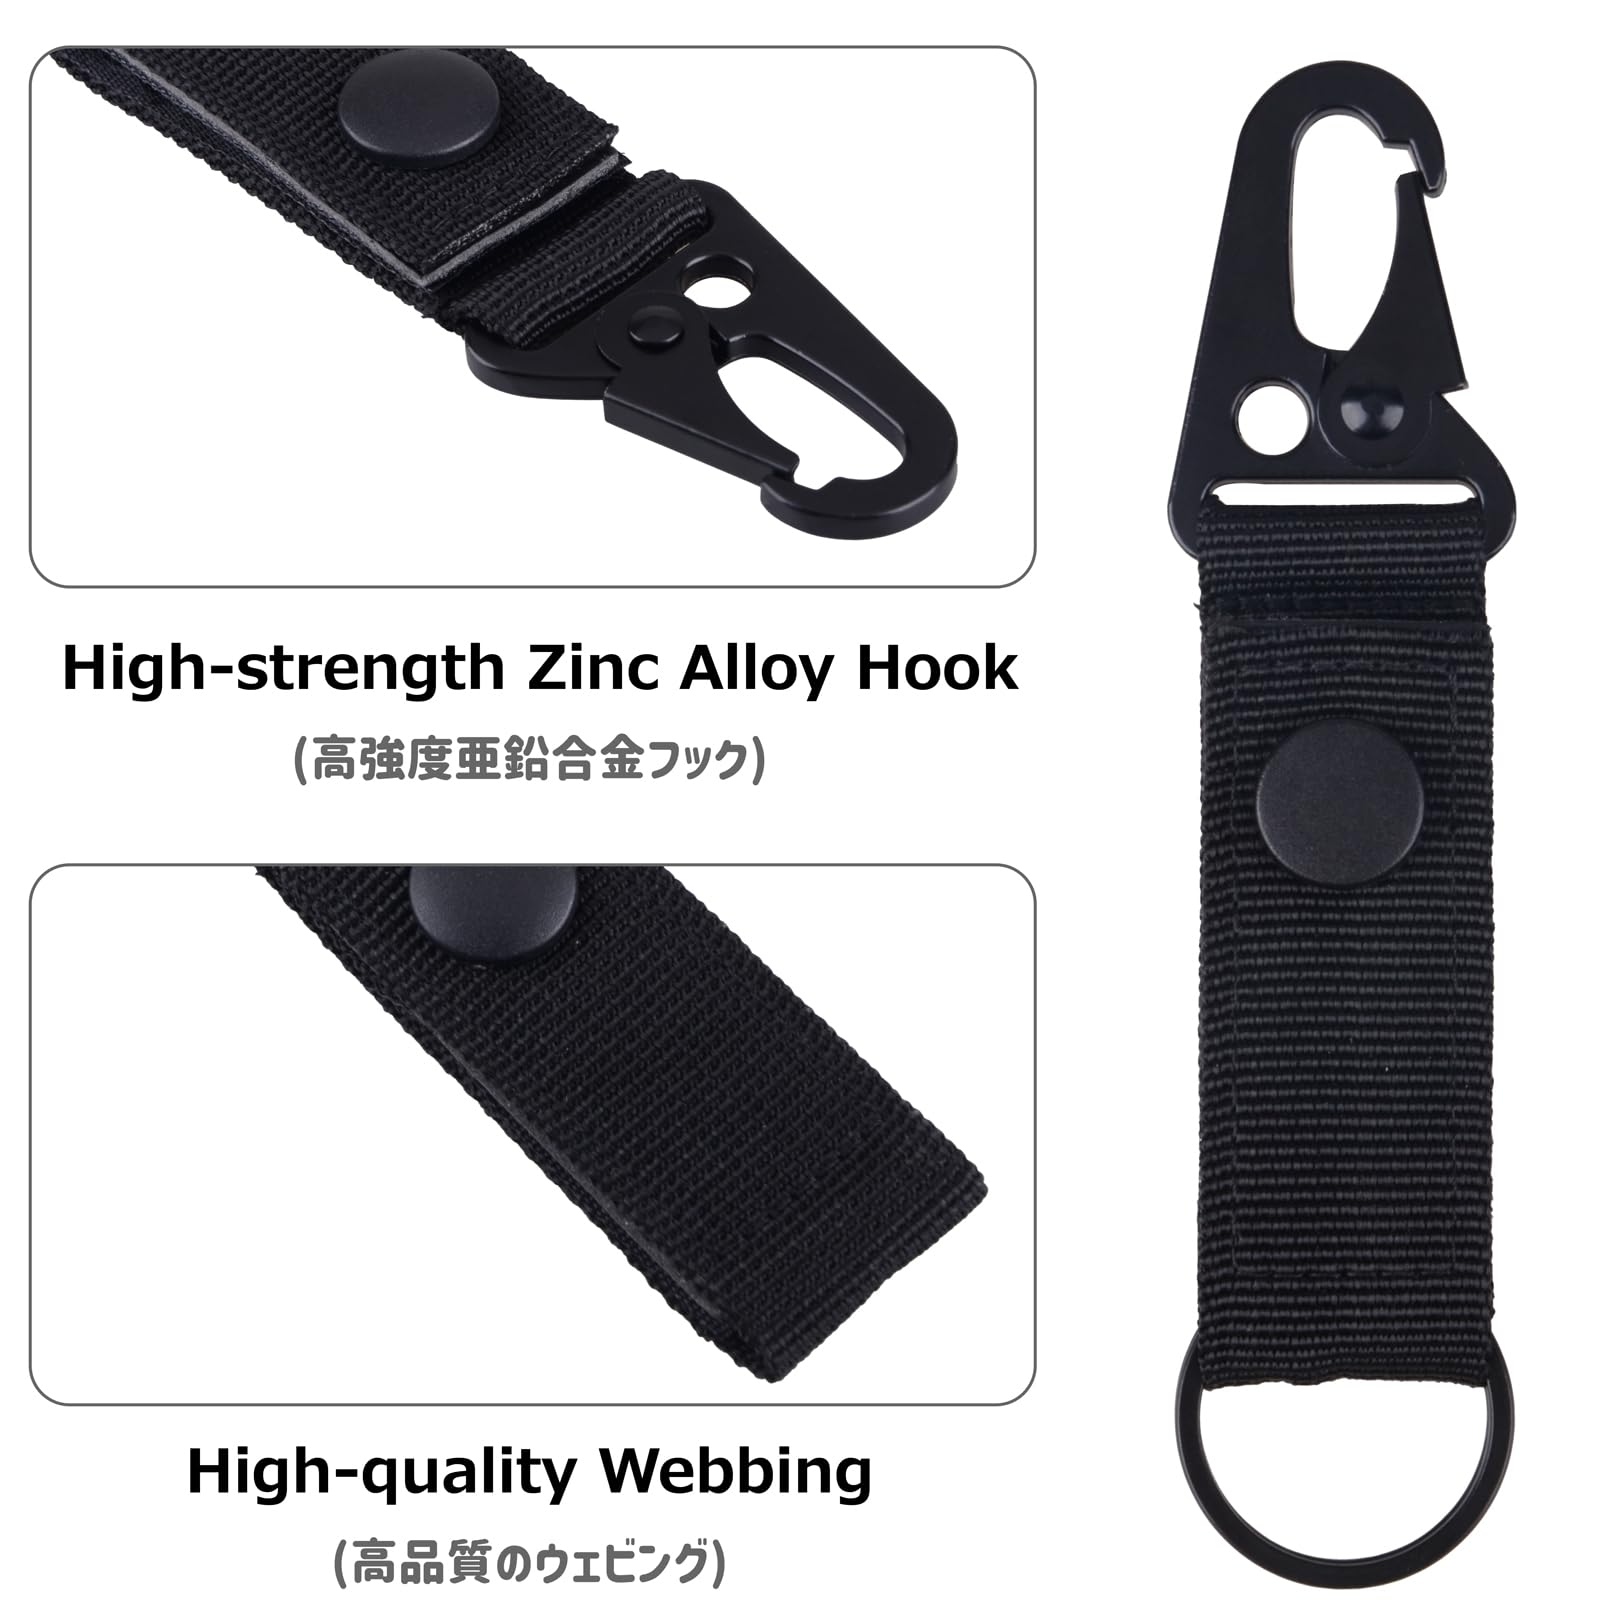 Azarxis Tactical Hanging Belt Webbing Carabiner Buckle Molle Strap Nylon Snap Hook Clip, Keychain Keyholder Ring Tactical Backpack Molle Clip for Climbing Hiking Outdoor (Black - Pack of 4)